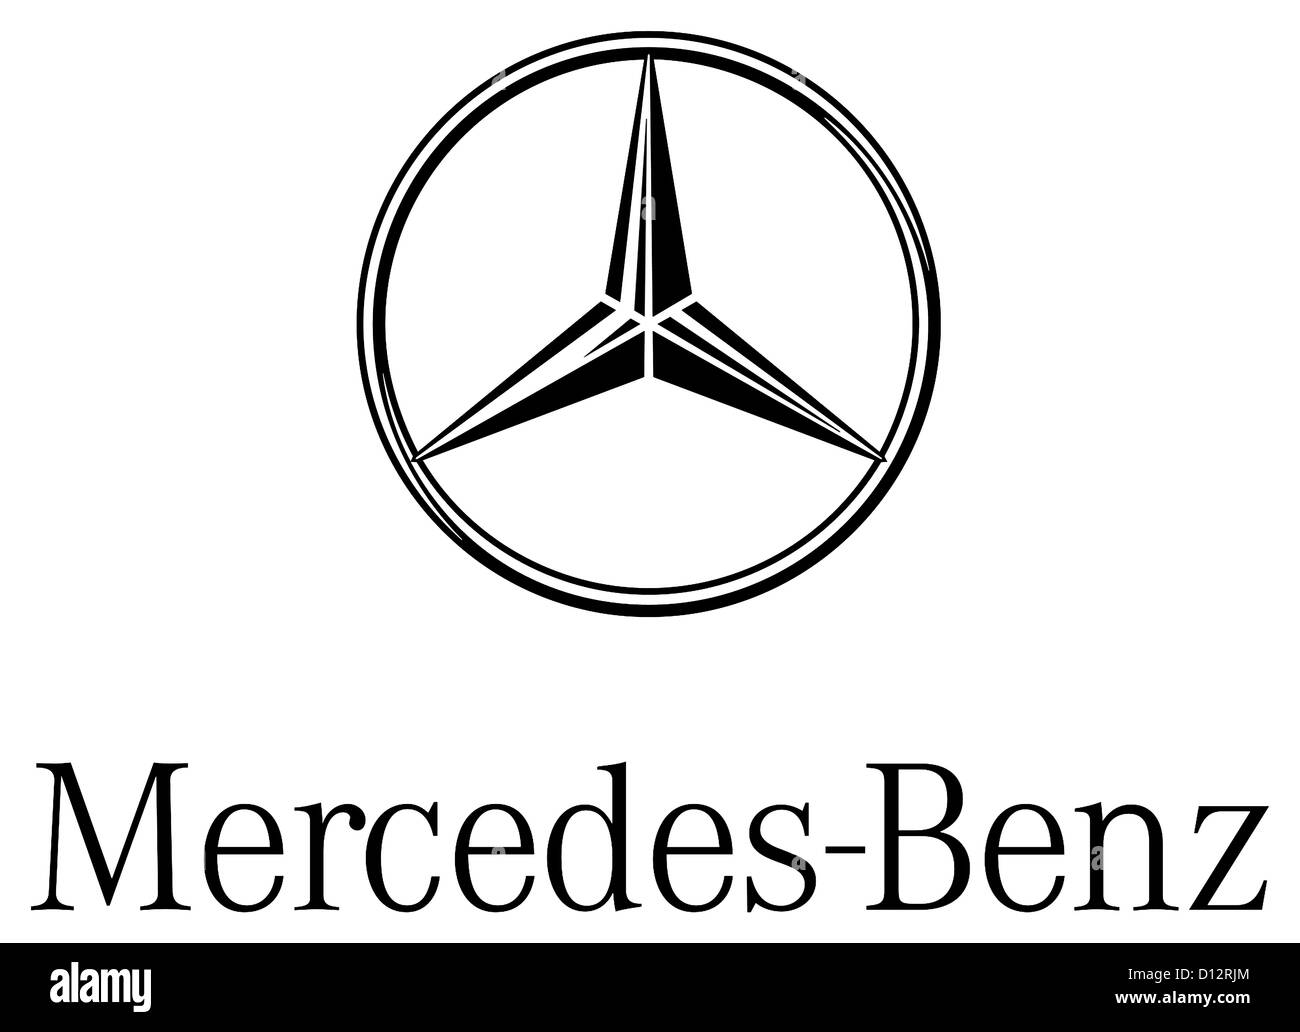 Logo of the make of car Mercedes-Benz of the German motorcar group Daimler AG with seat in Stuttgart. Stock Photo